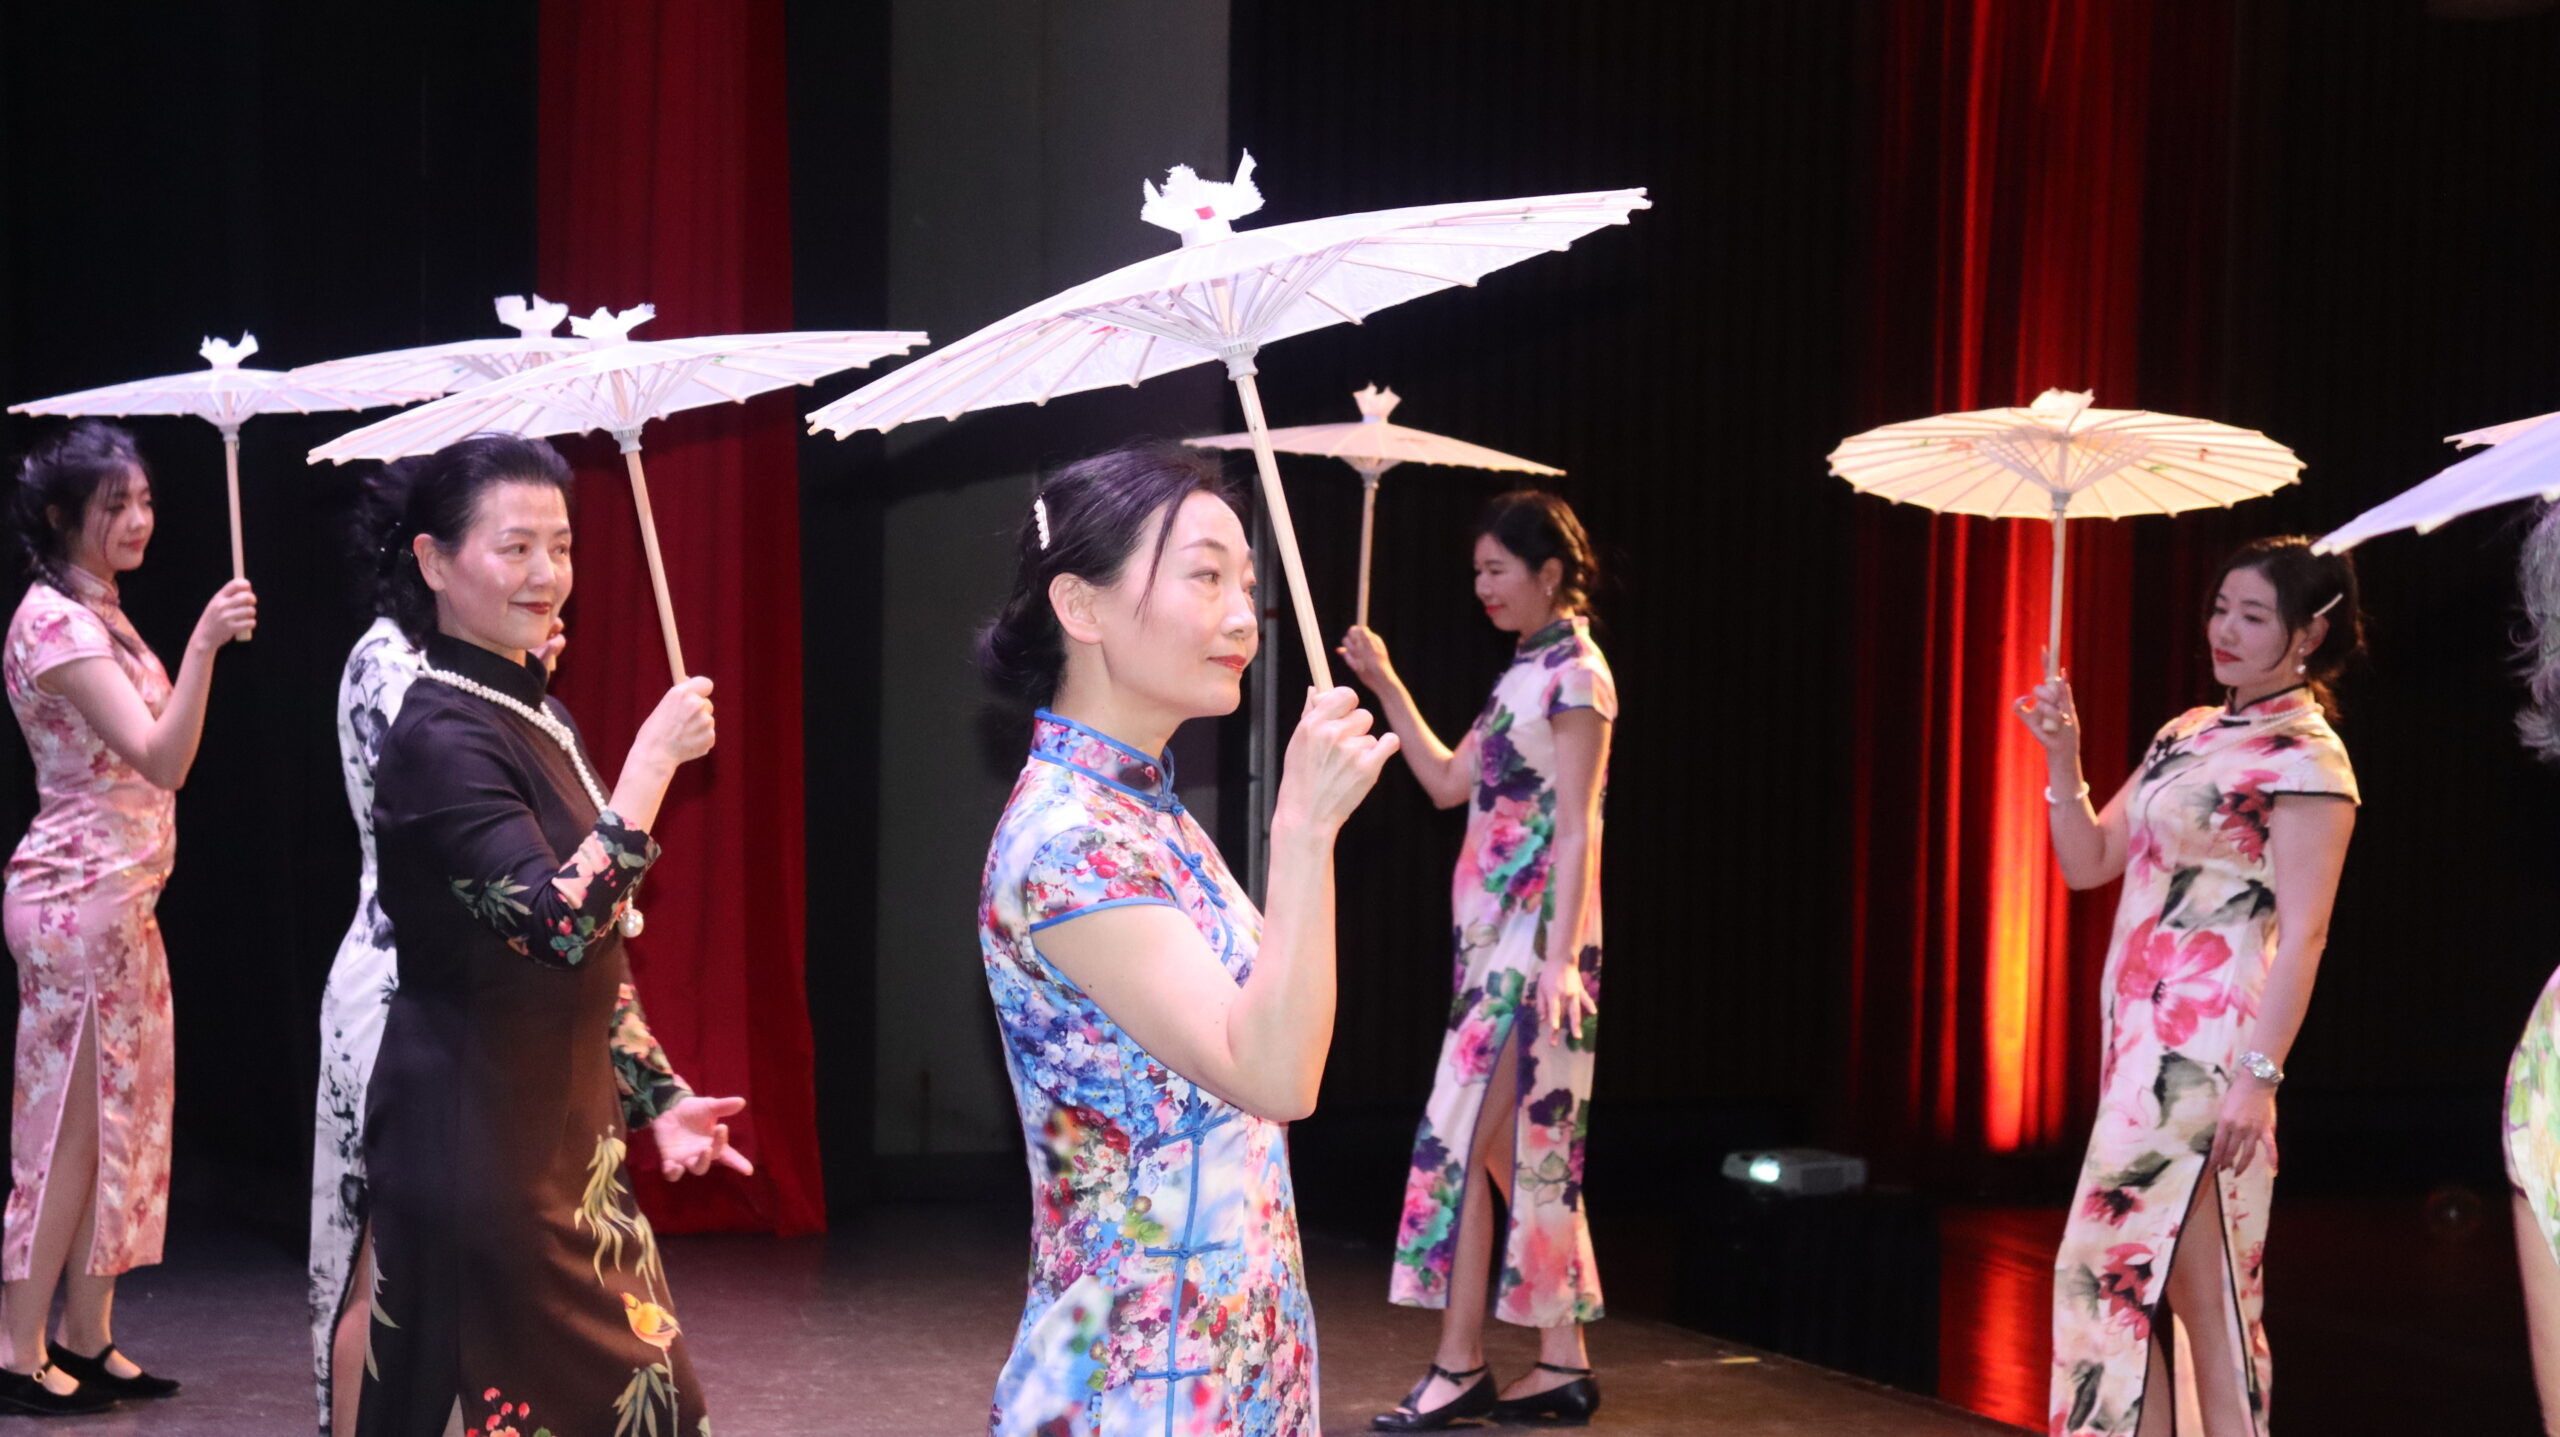 A group of women in cheongsam holding oil-paper umbrellas.